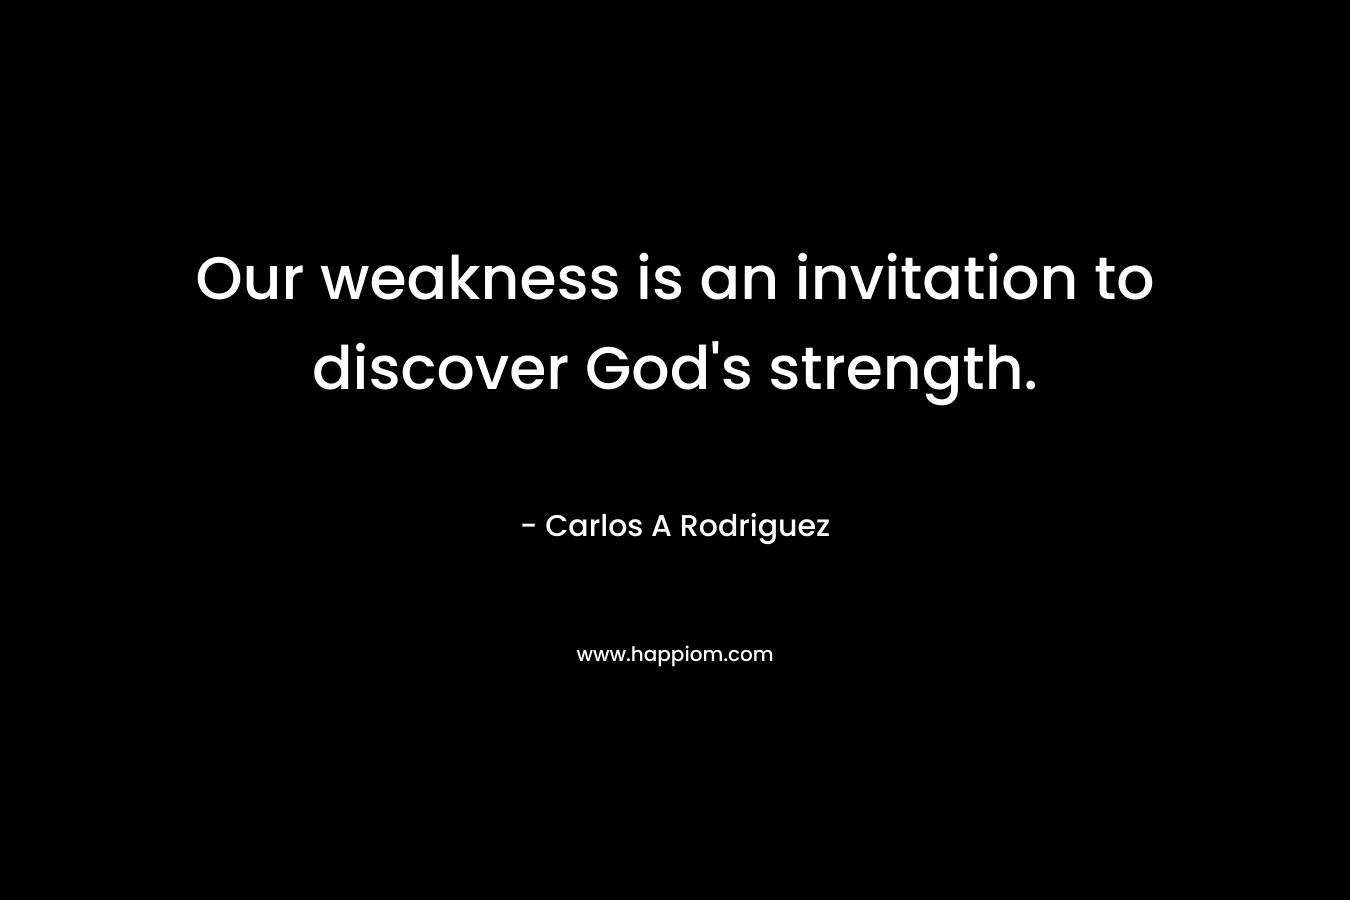 Our weakness is an invitation to discover God's strength.